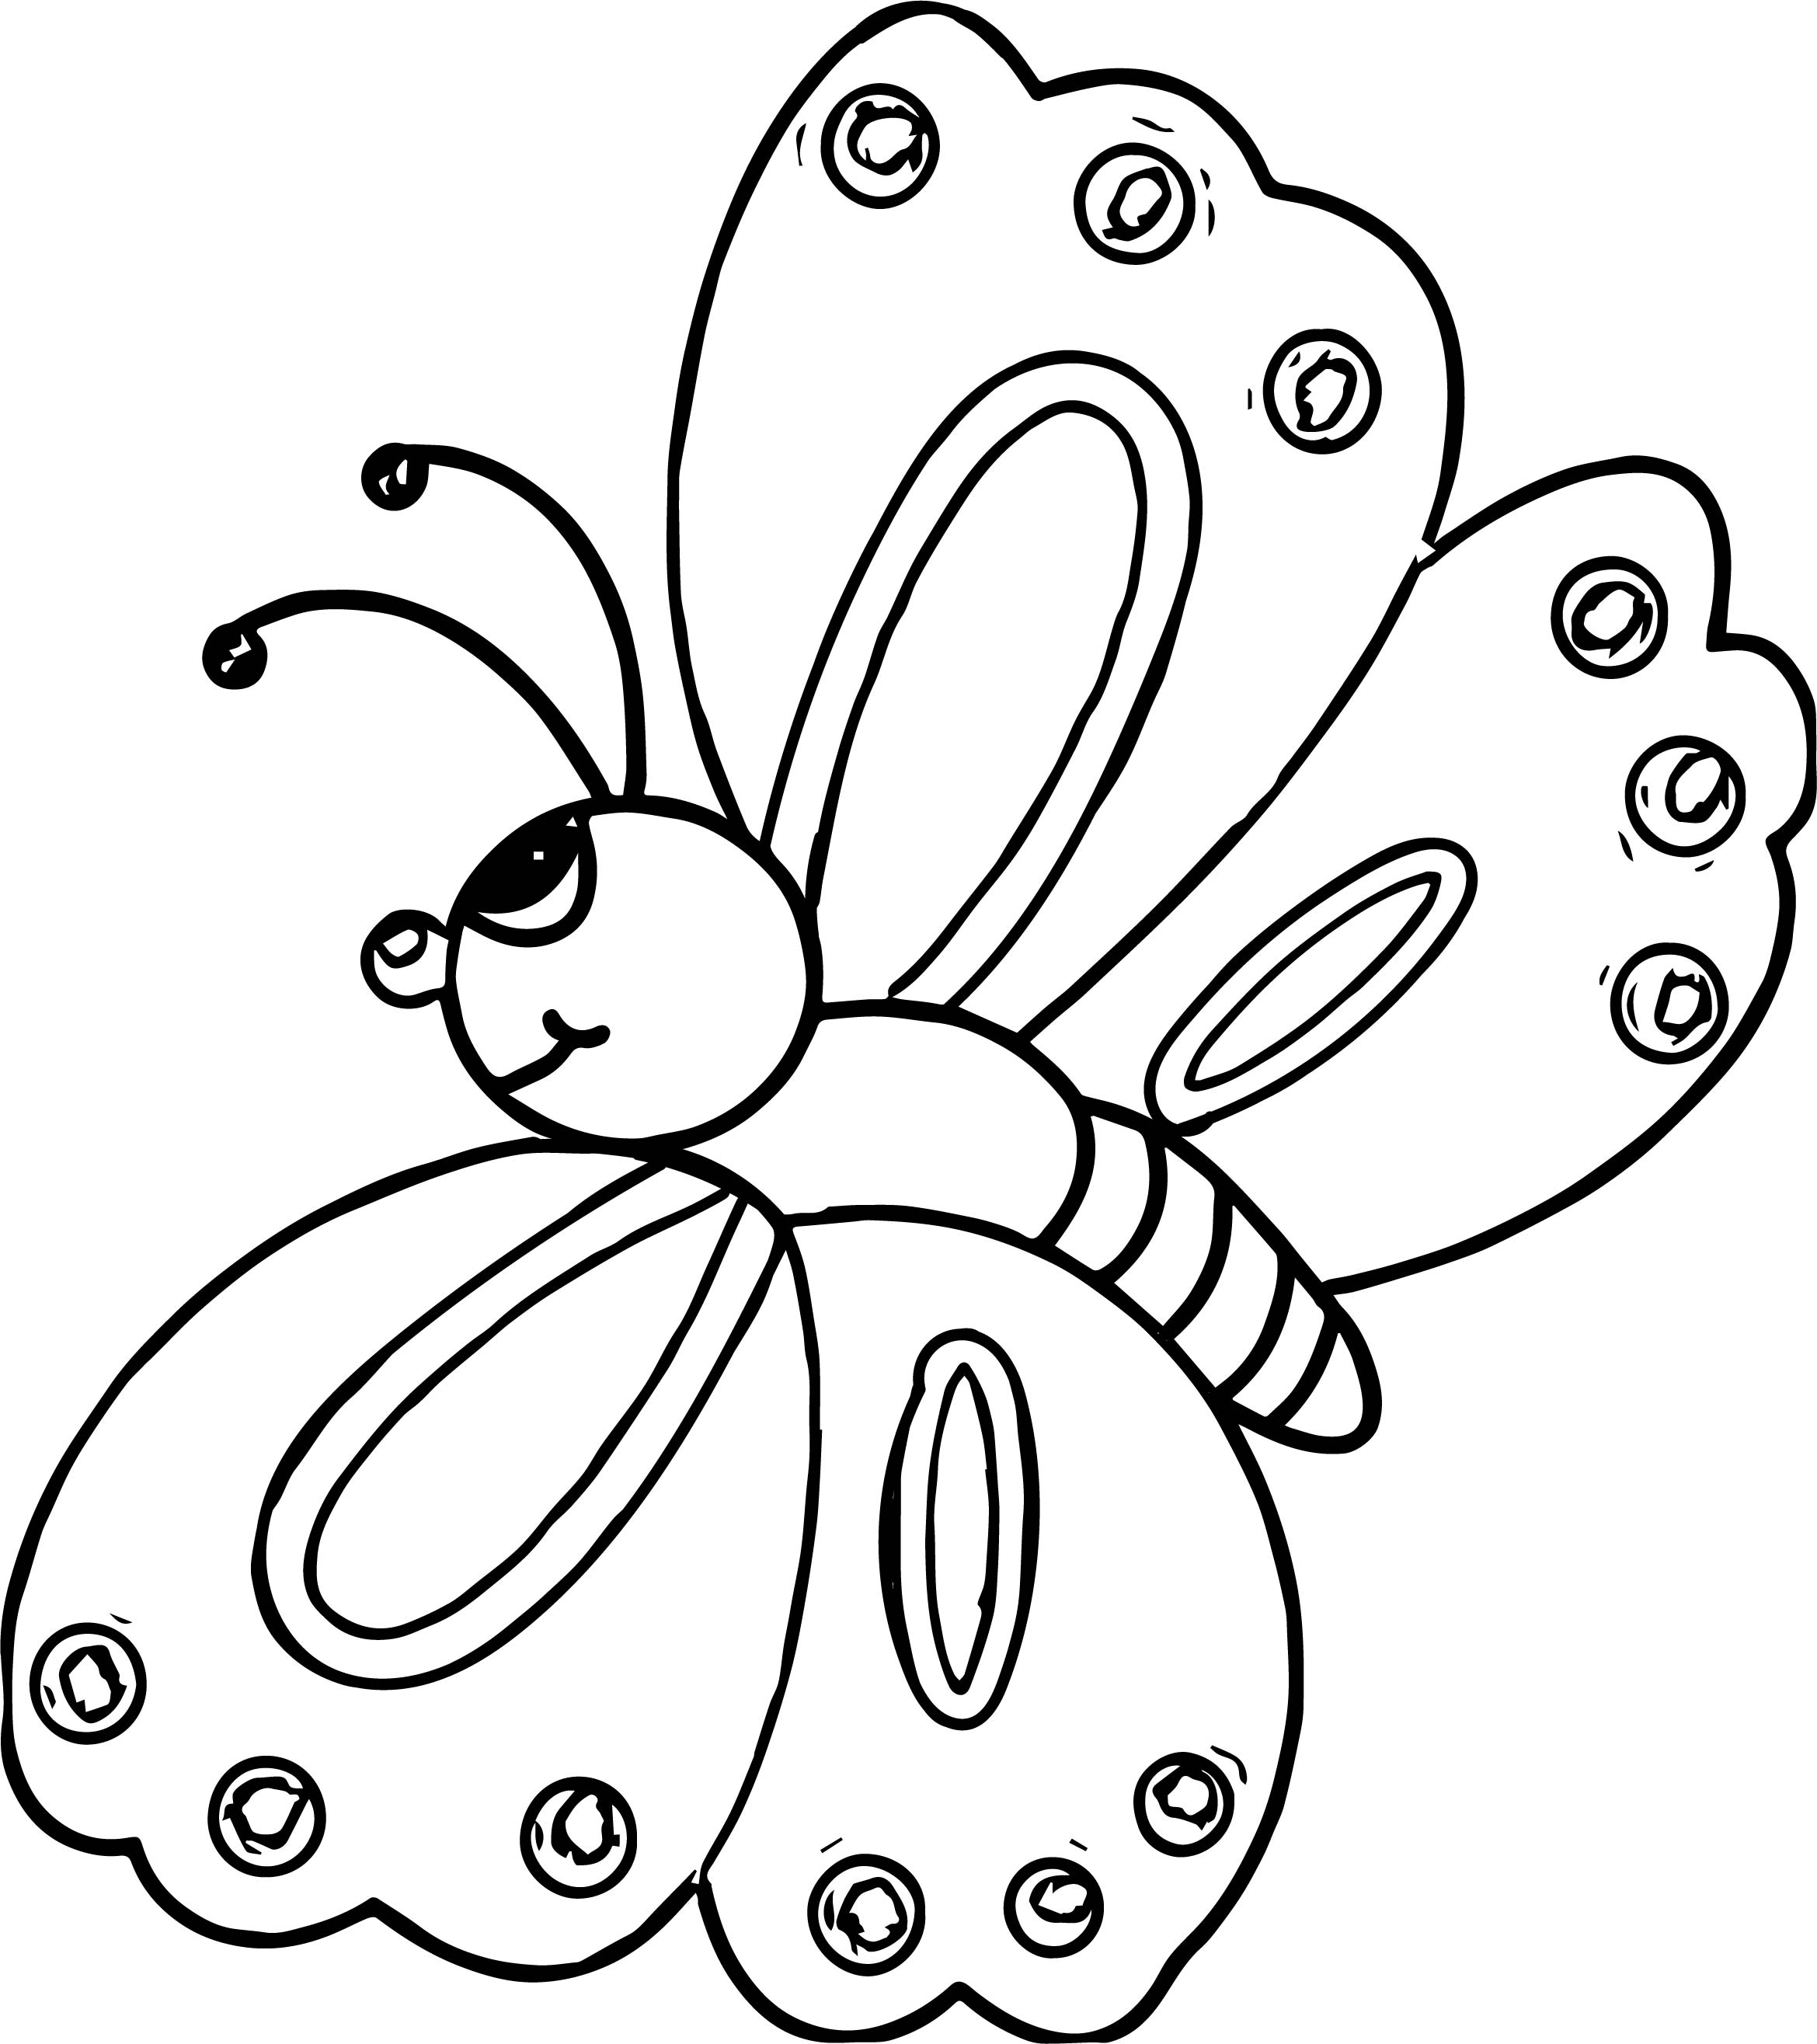 Blue Morpho Butterfly Coloring Page Coloring Pages 3000 | The Best Porn ...